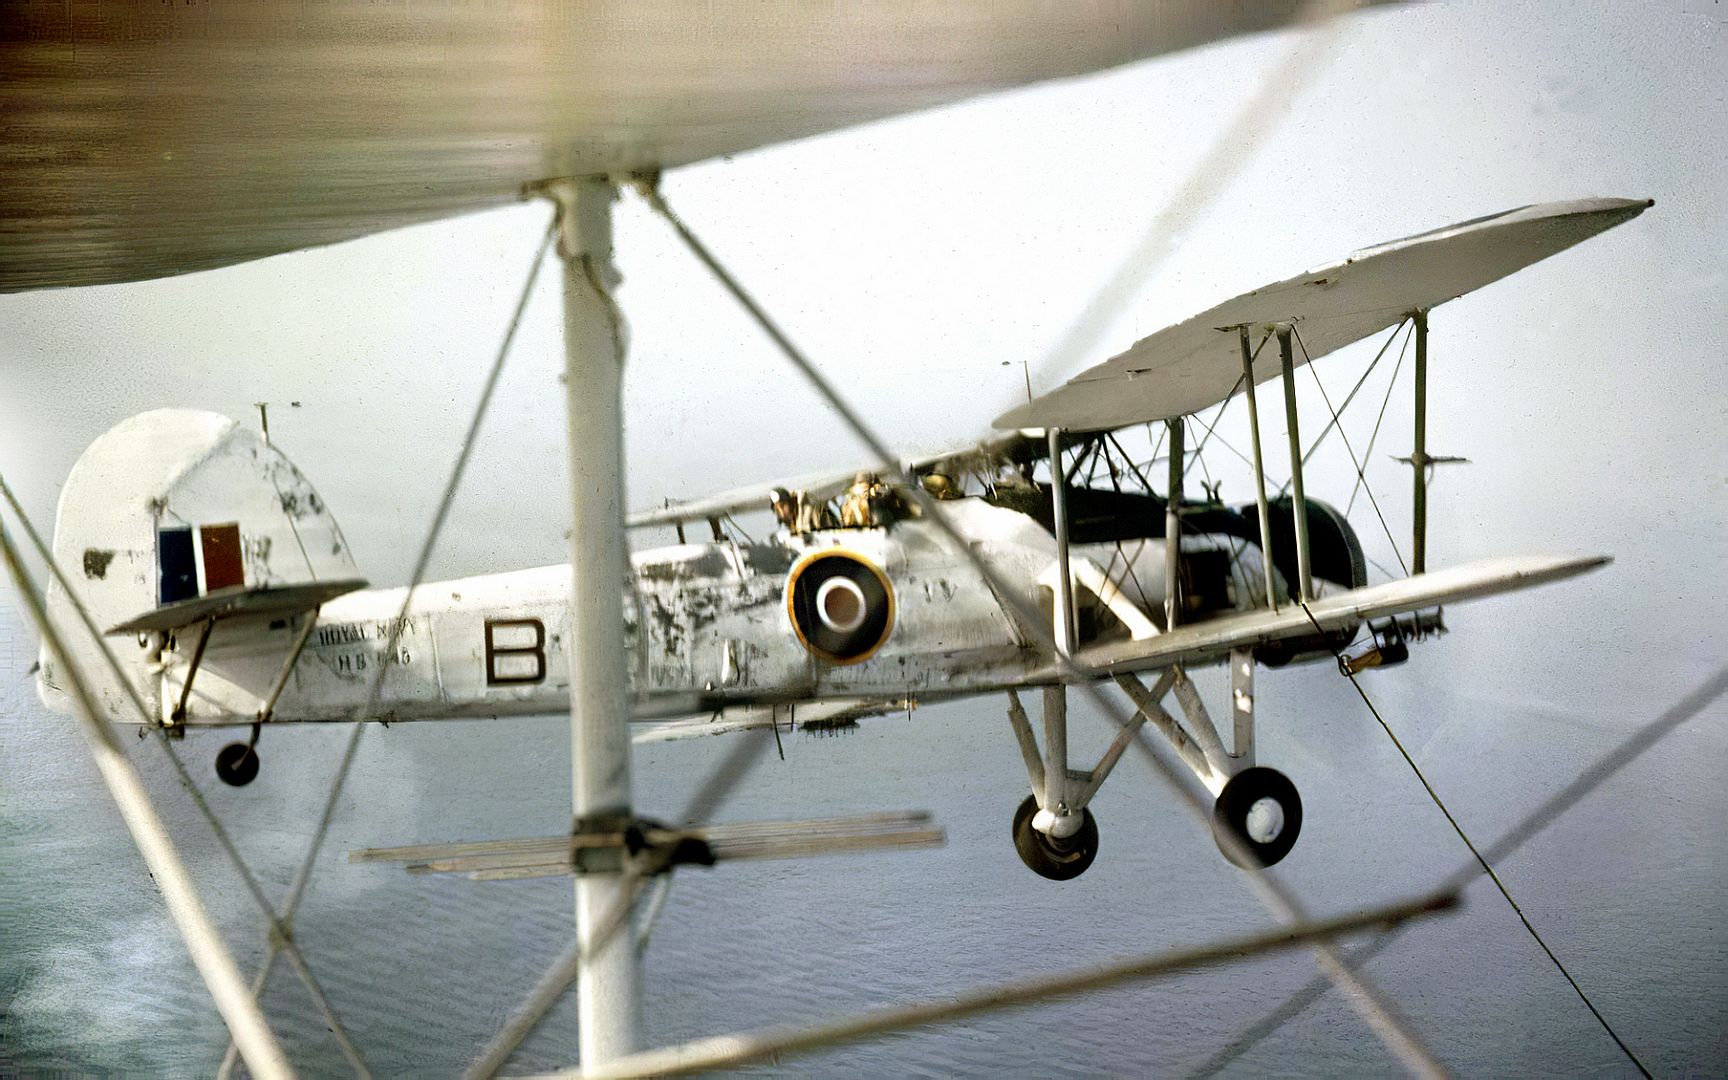 Fairy Swordfish Mk III HS645 In Service With An Unknown RN Squadron